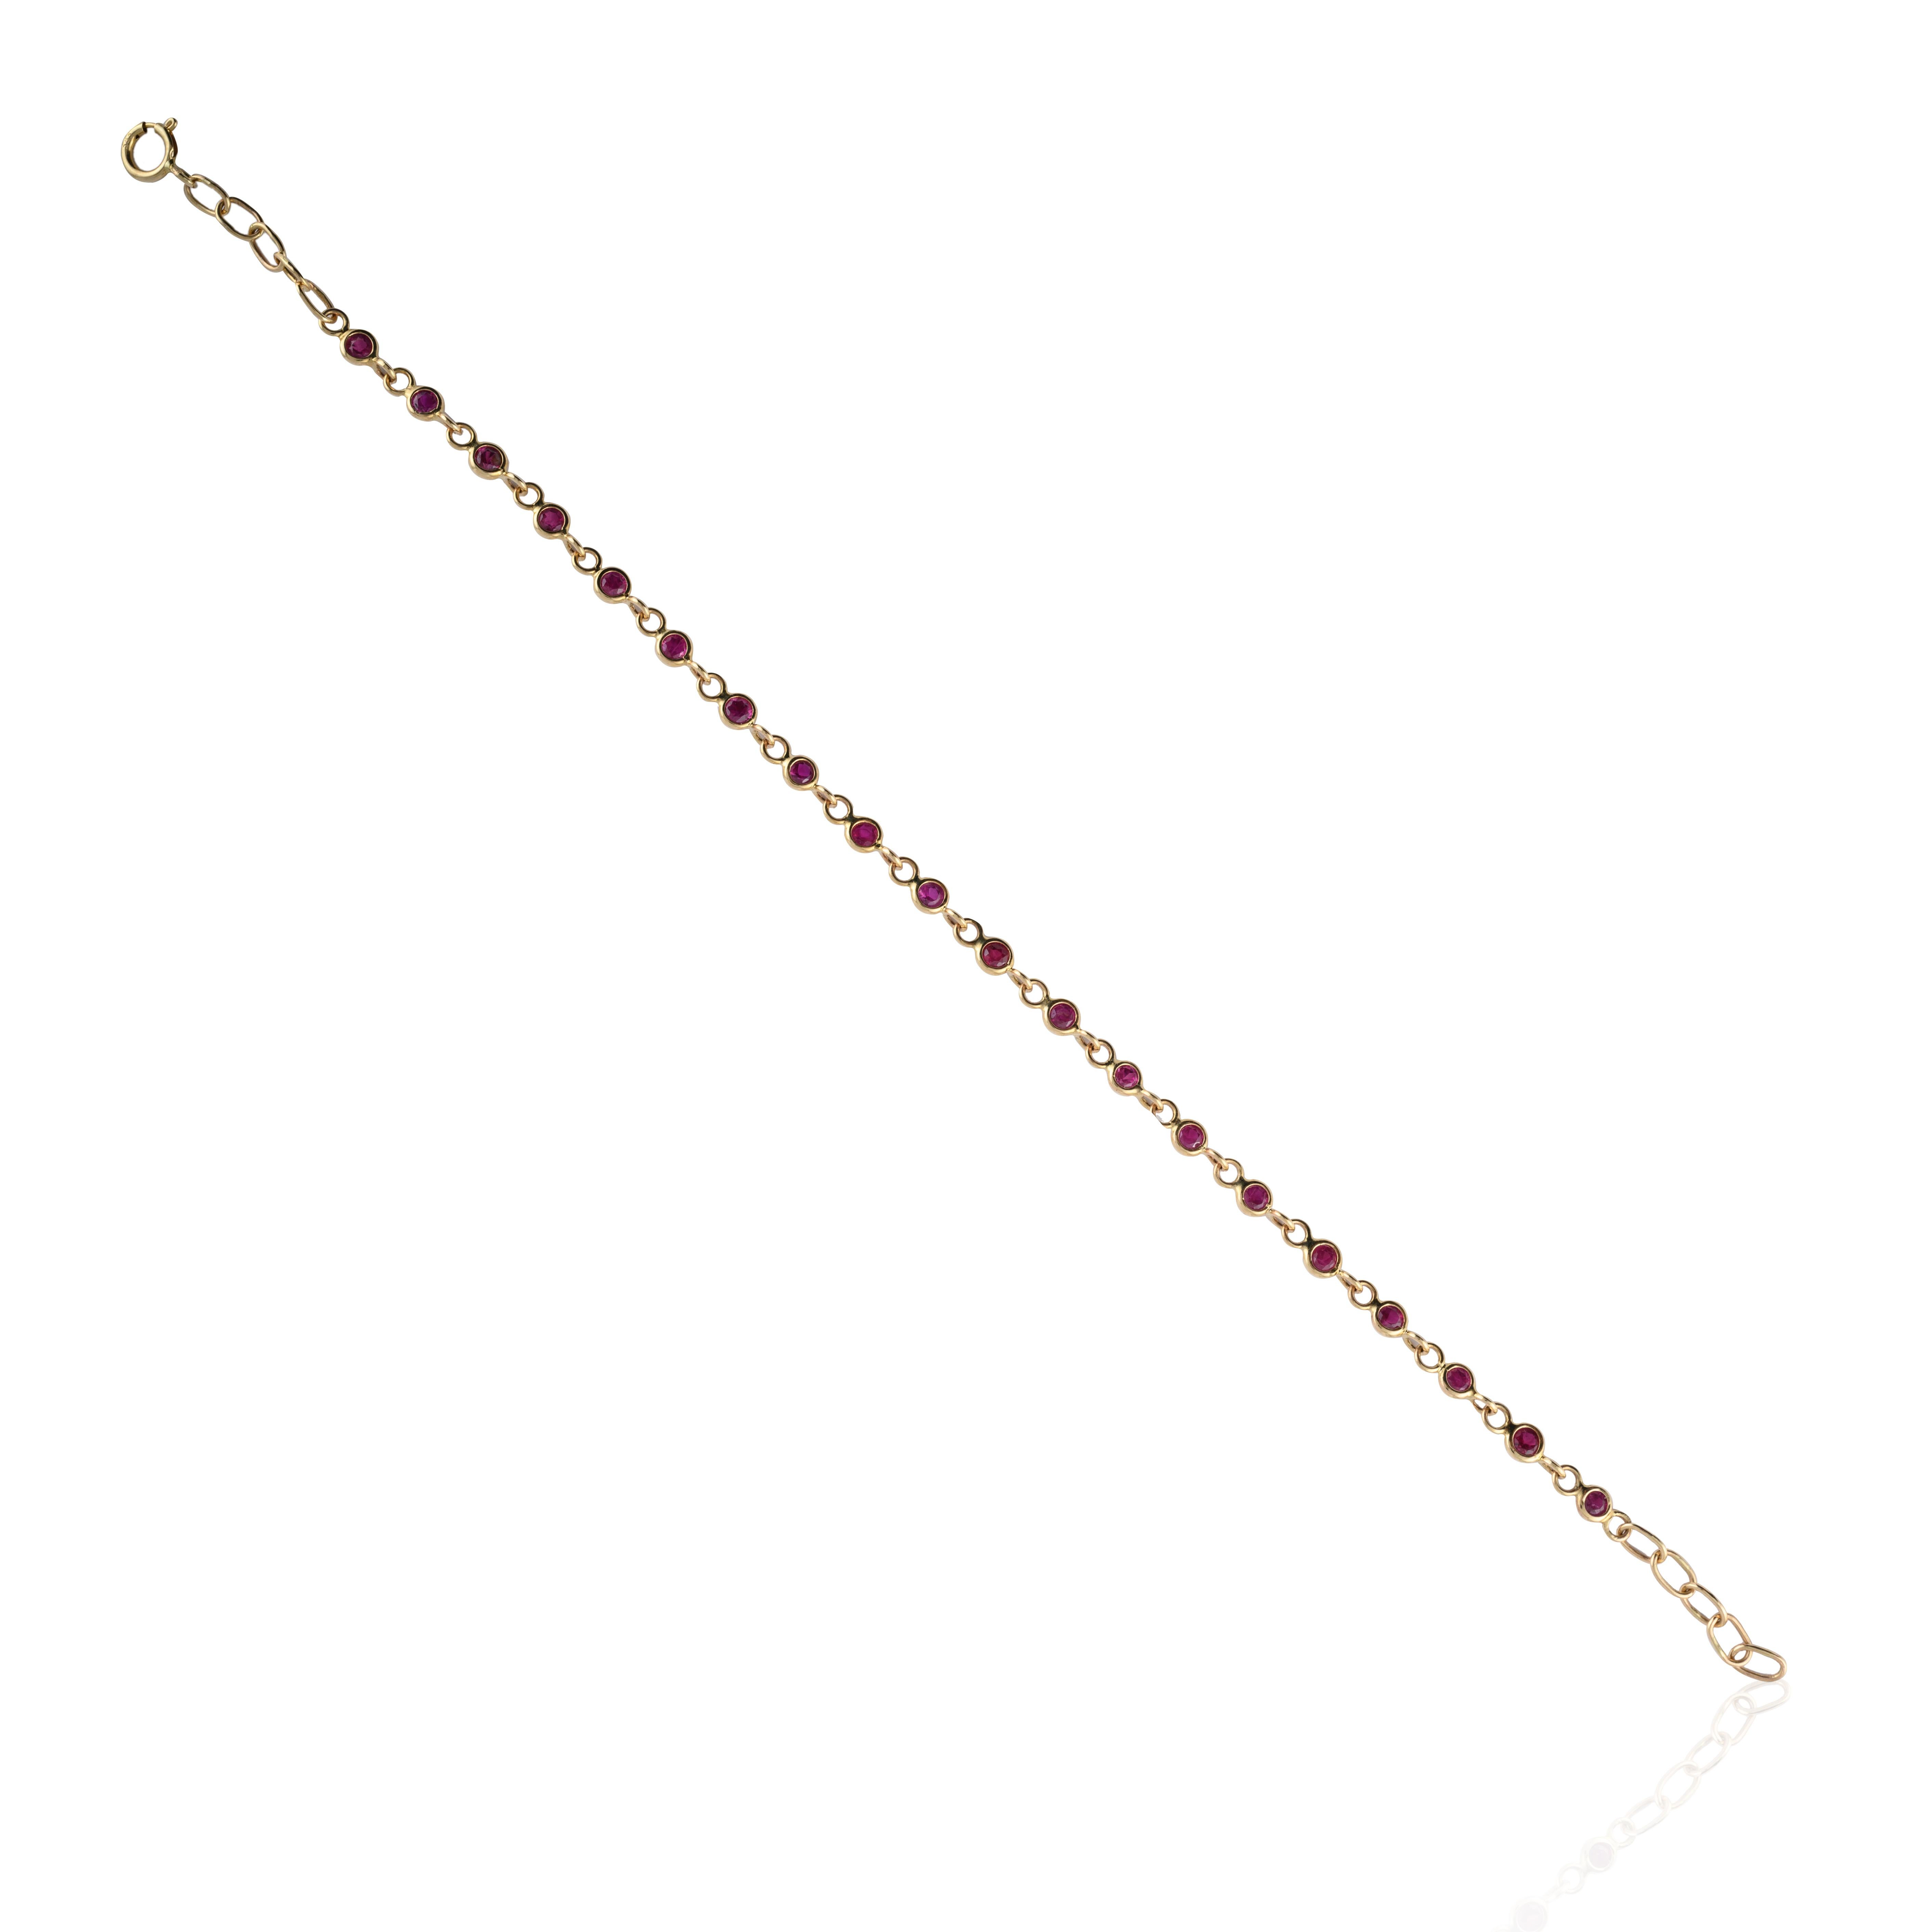 This Stackable Ruby Link Chain Bracelet in 14K Gold showcases 20 endlessly natural ruby, weighing 1.52 carats. It measures 7 inches long in length. 
Ruby gemstone improves mental strength. 
Designed with perfect round cut ruby linked with chain to